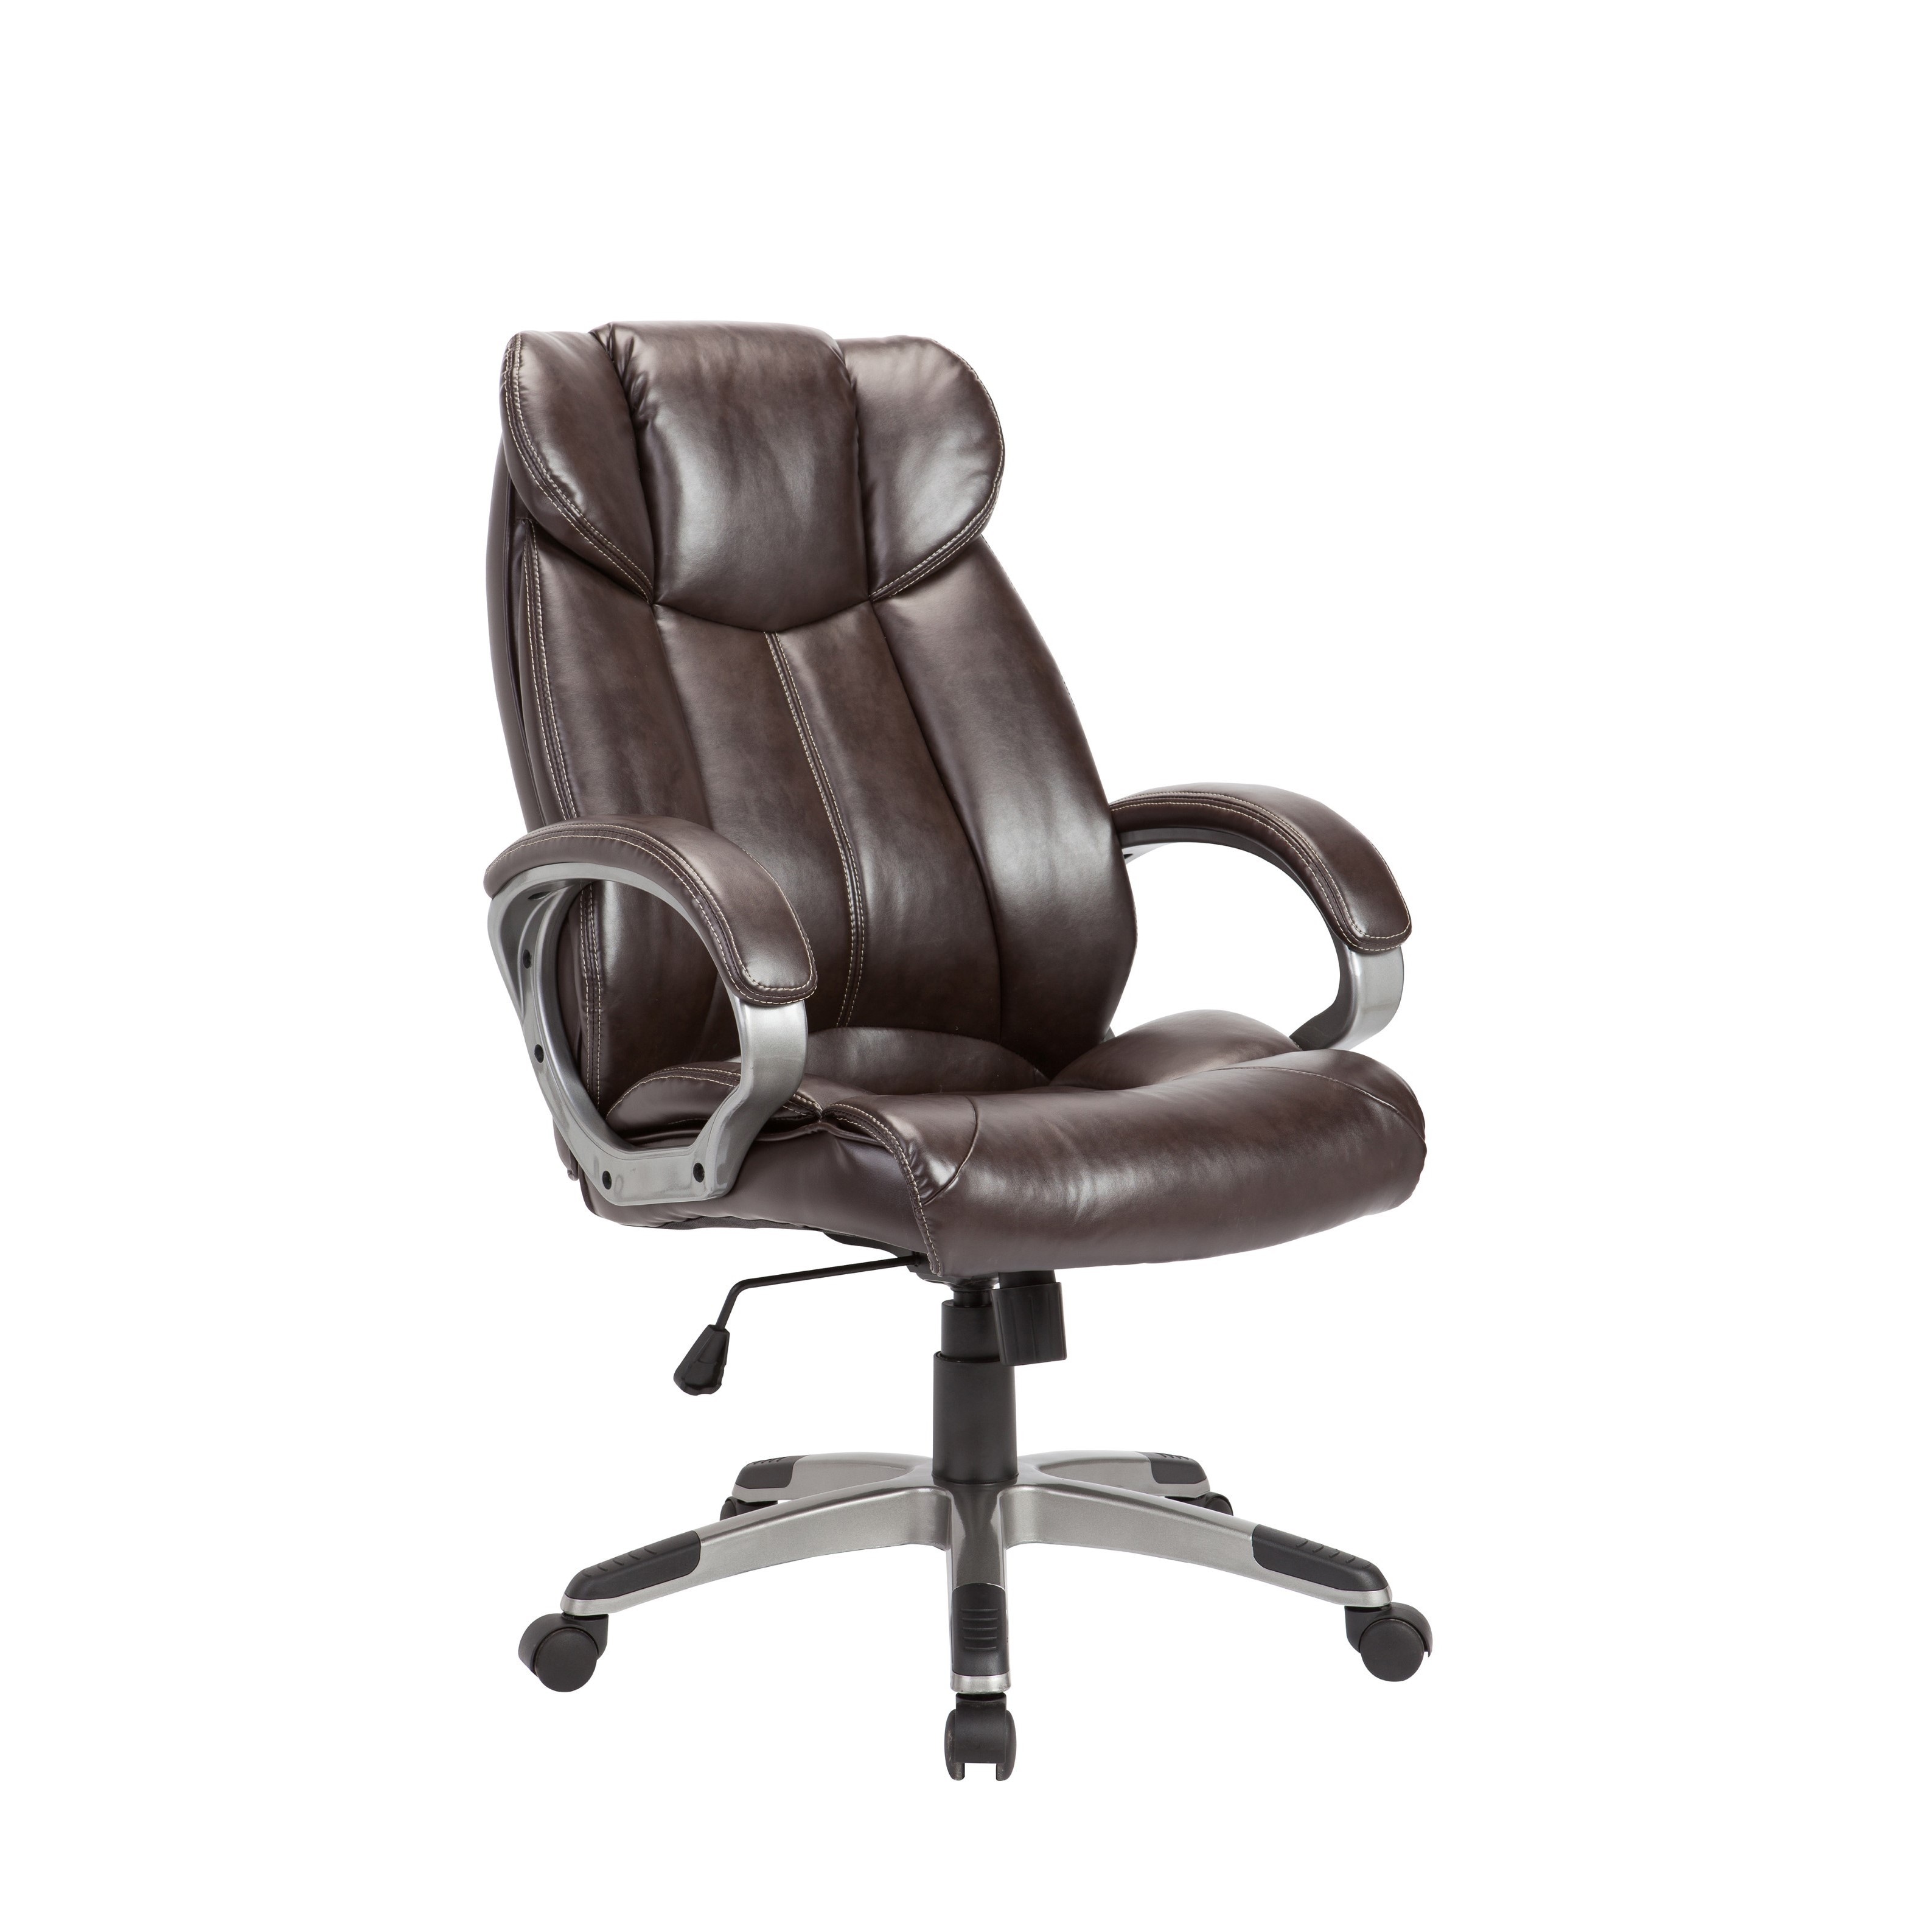 AC Pacific Brown Powder-coated Adjustable Swivel Office Chair